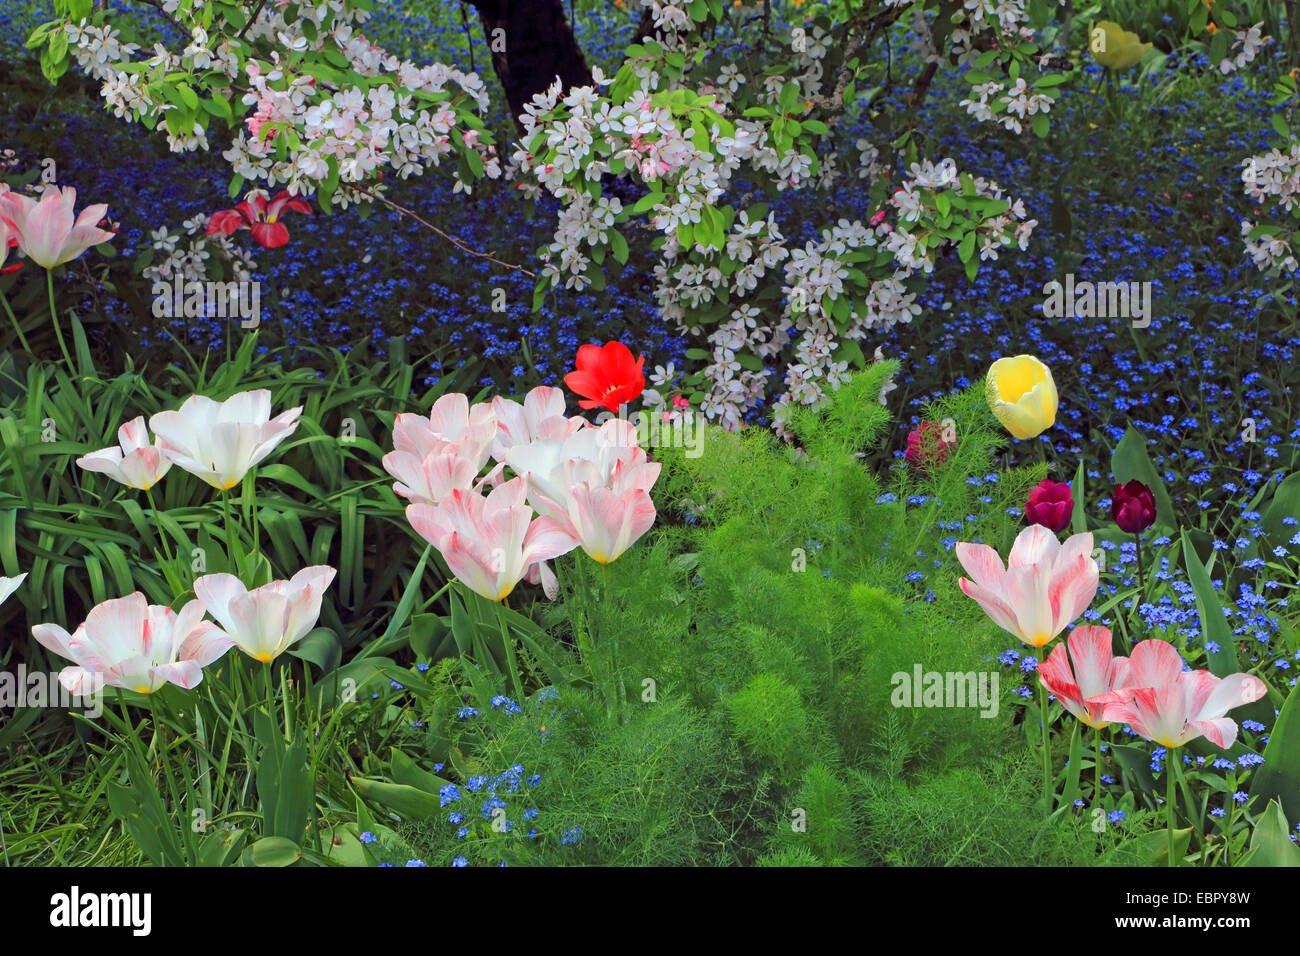 common garden tulip (Tulipa spec.), flowerbed with tulips, forget-me-nots and blooming ornamental apple tree, Germany Stock Photo